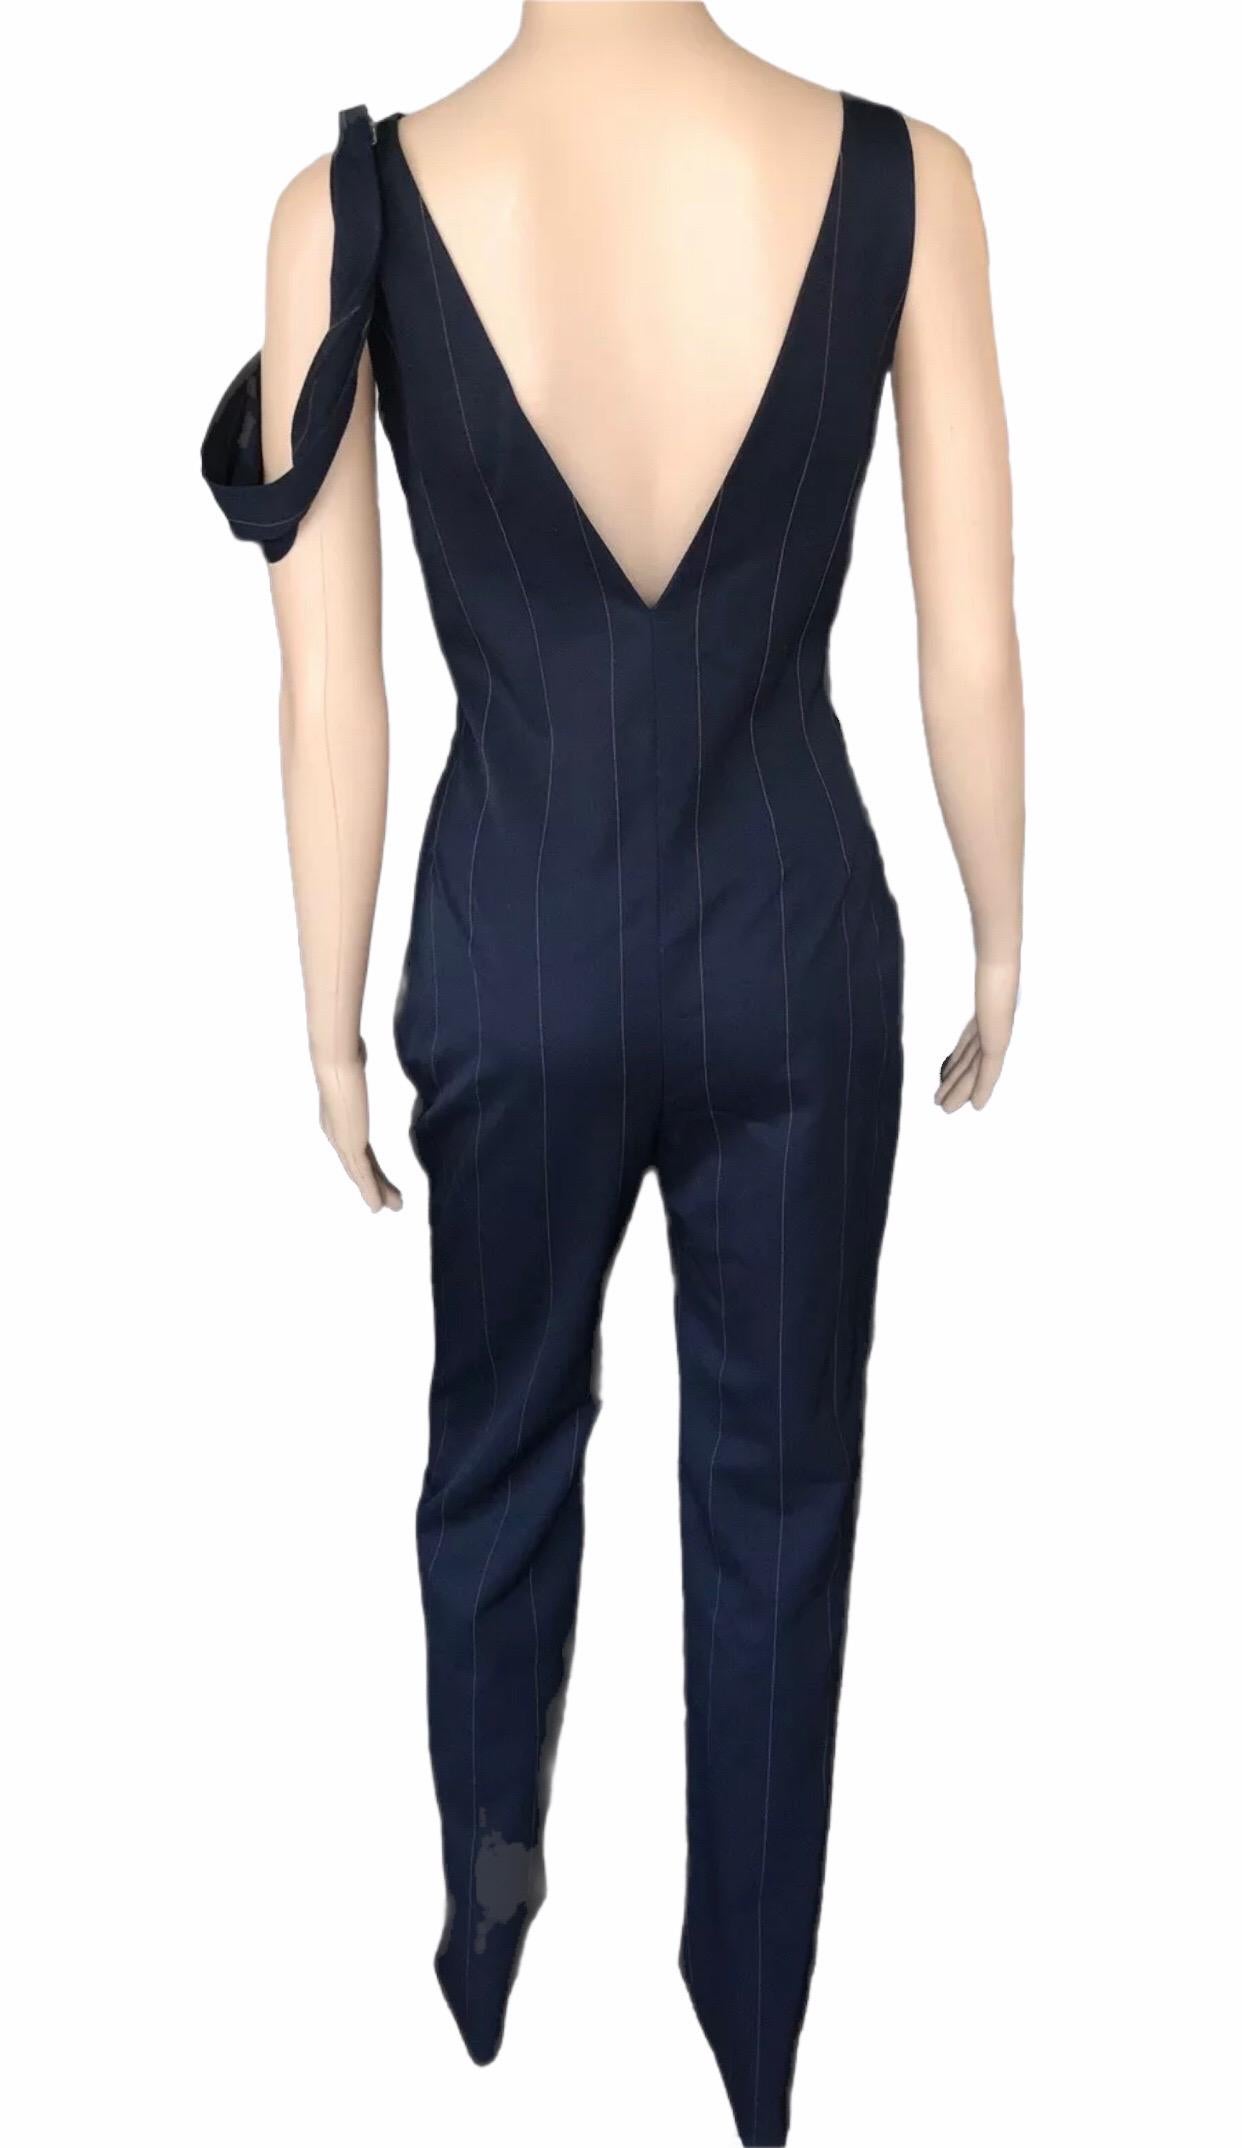 Black Gianni Versace F/W 1998 Vintage Pinstriped Plunging Open Back Jumpsuit For Sale